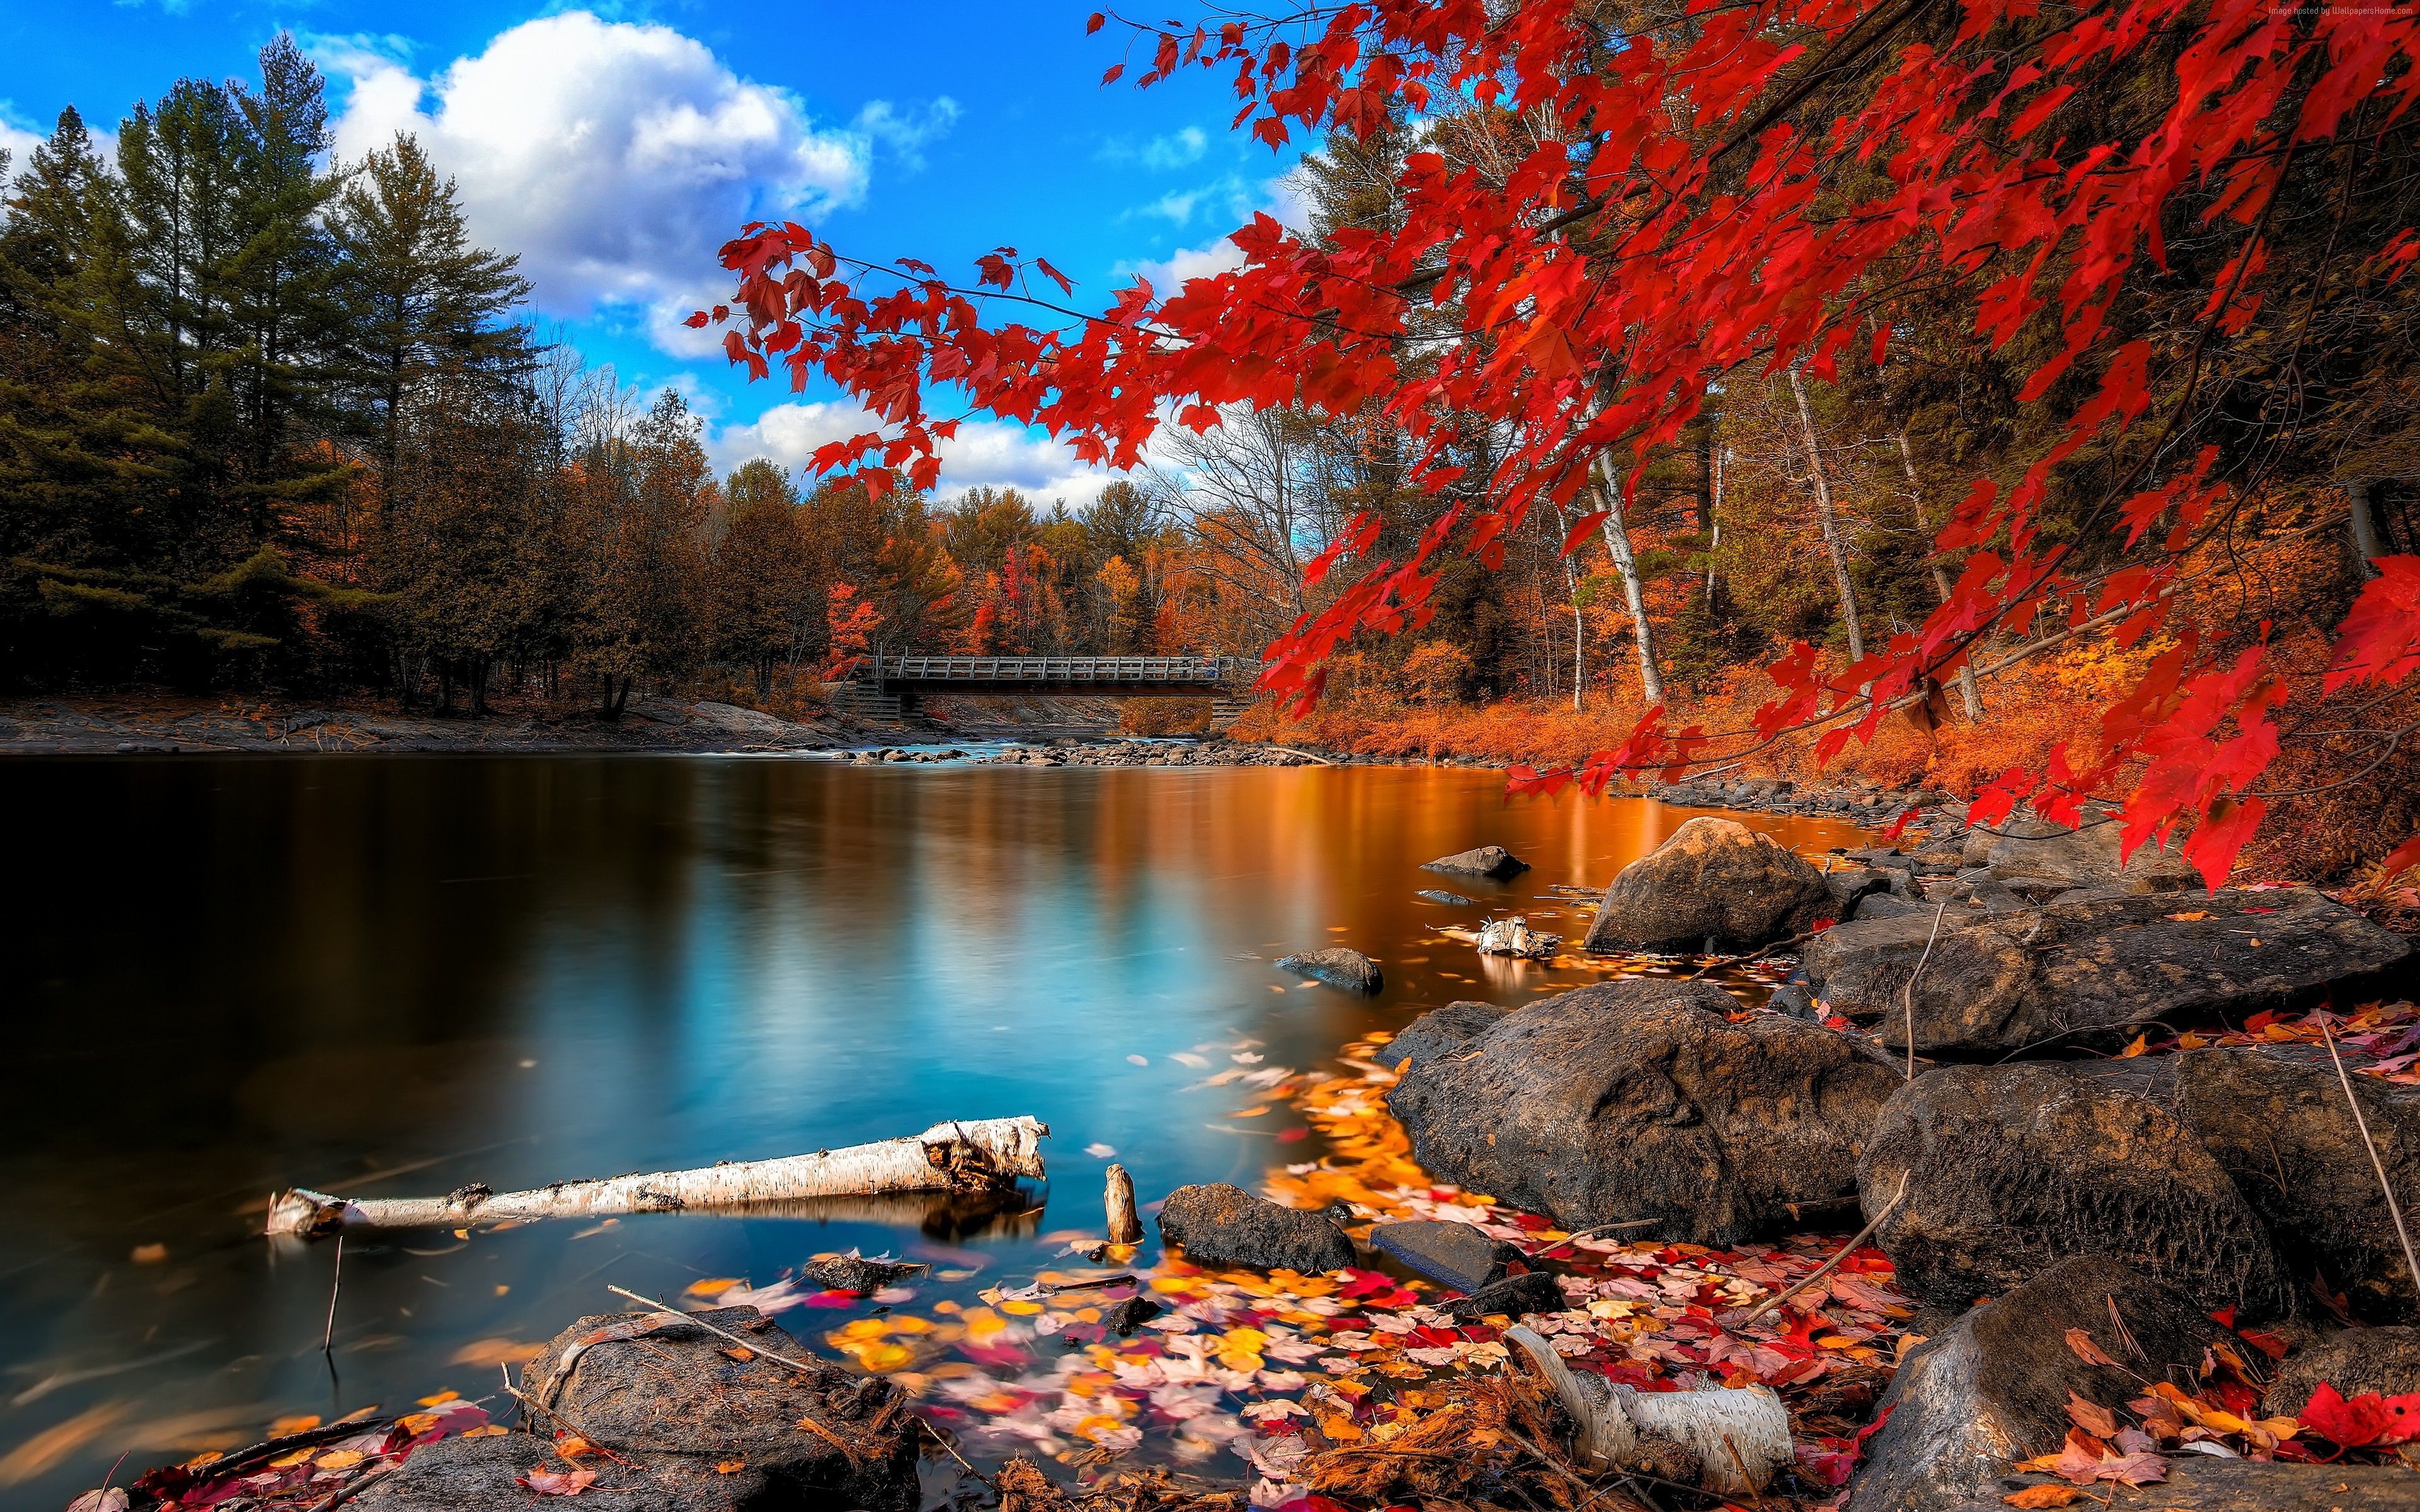 Autumn Forest Background for Desktop. Scenery wallpaper, Beautiful nature, Scenery